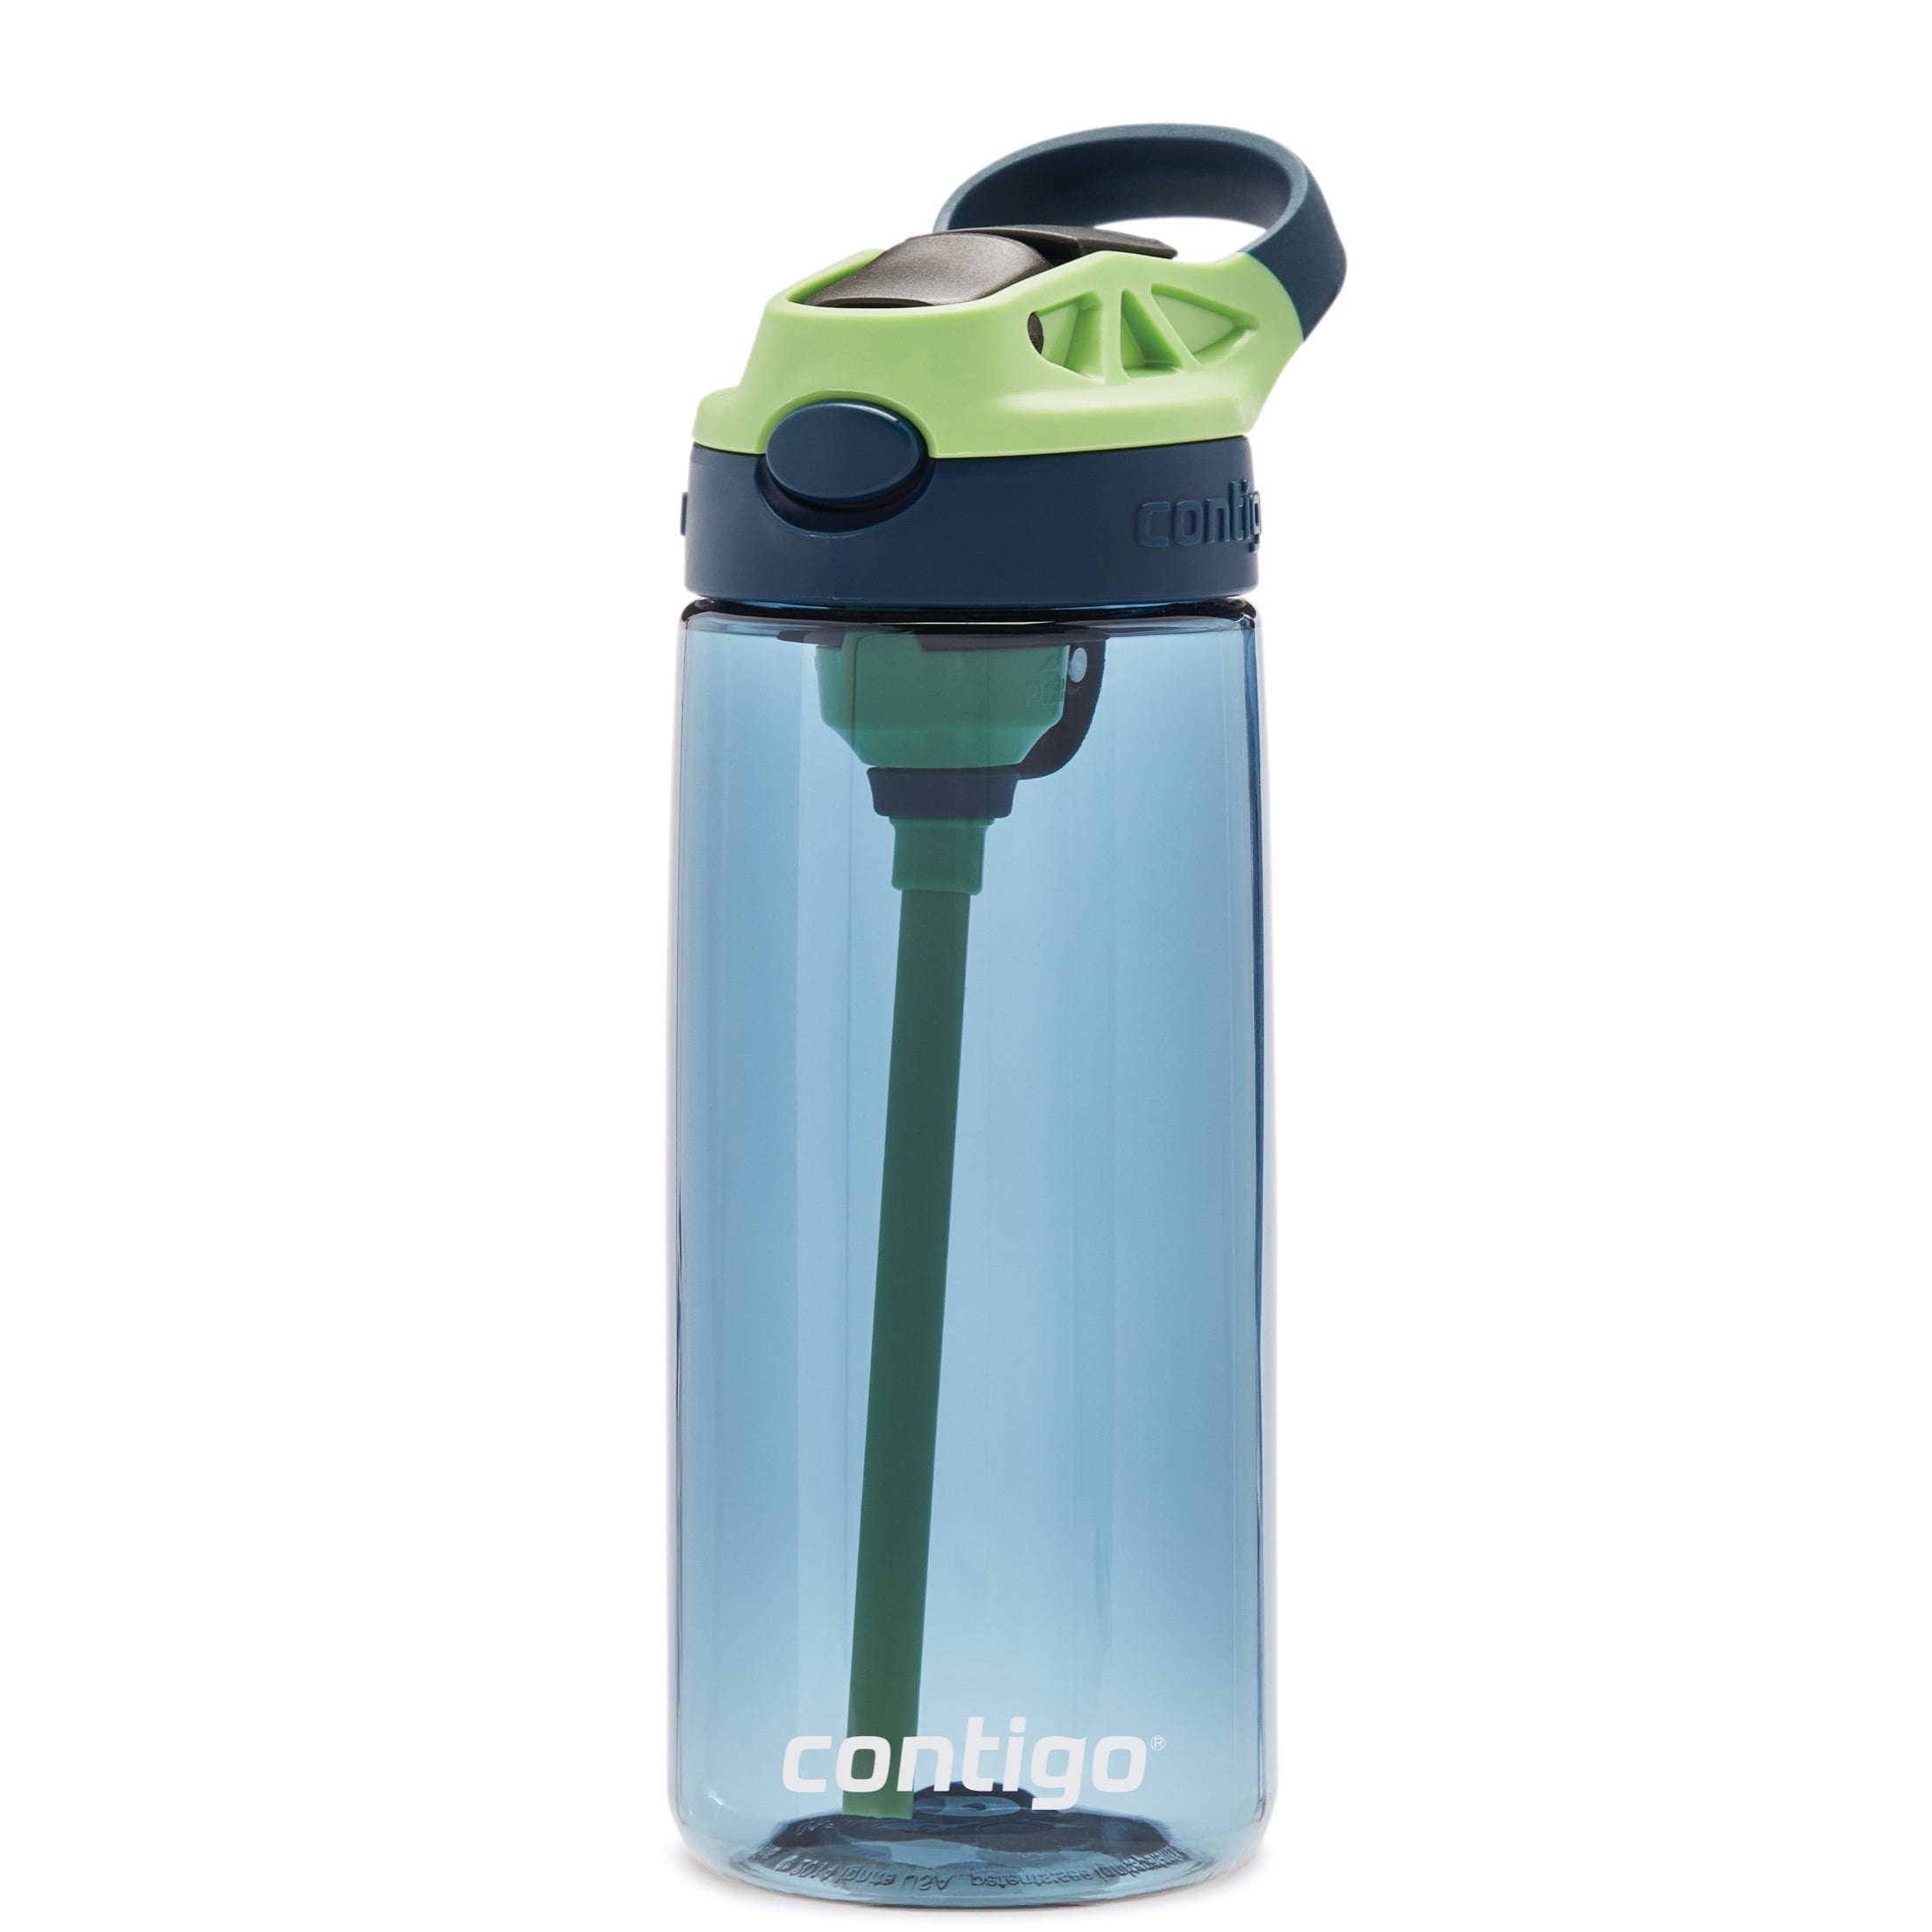 Contigo® Expands Reusable Beverage Container Portfolio With Three New  Innovations Just in Time for Summer